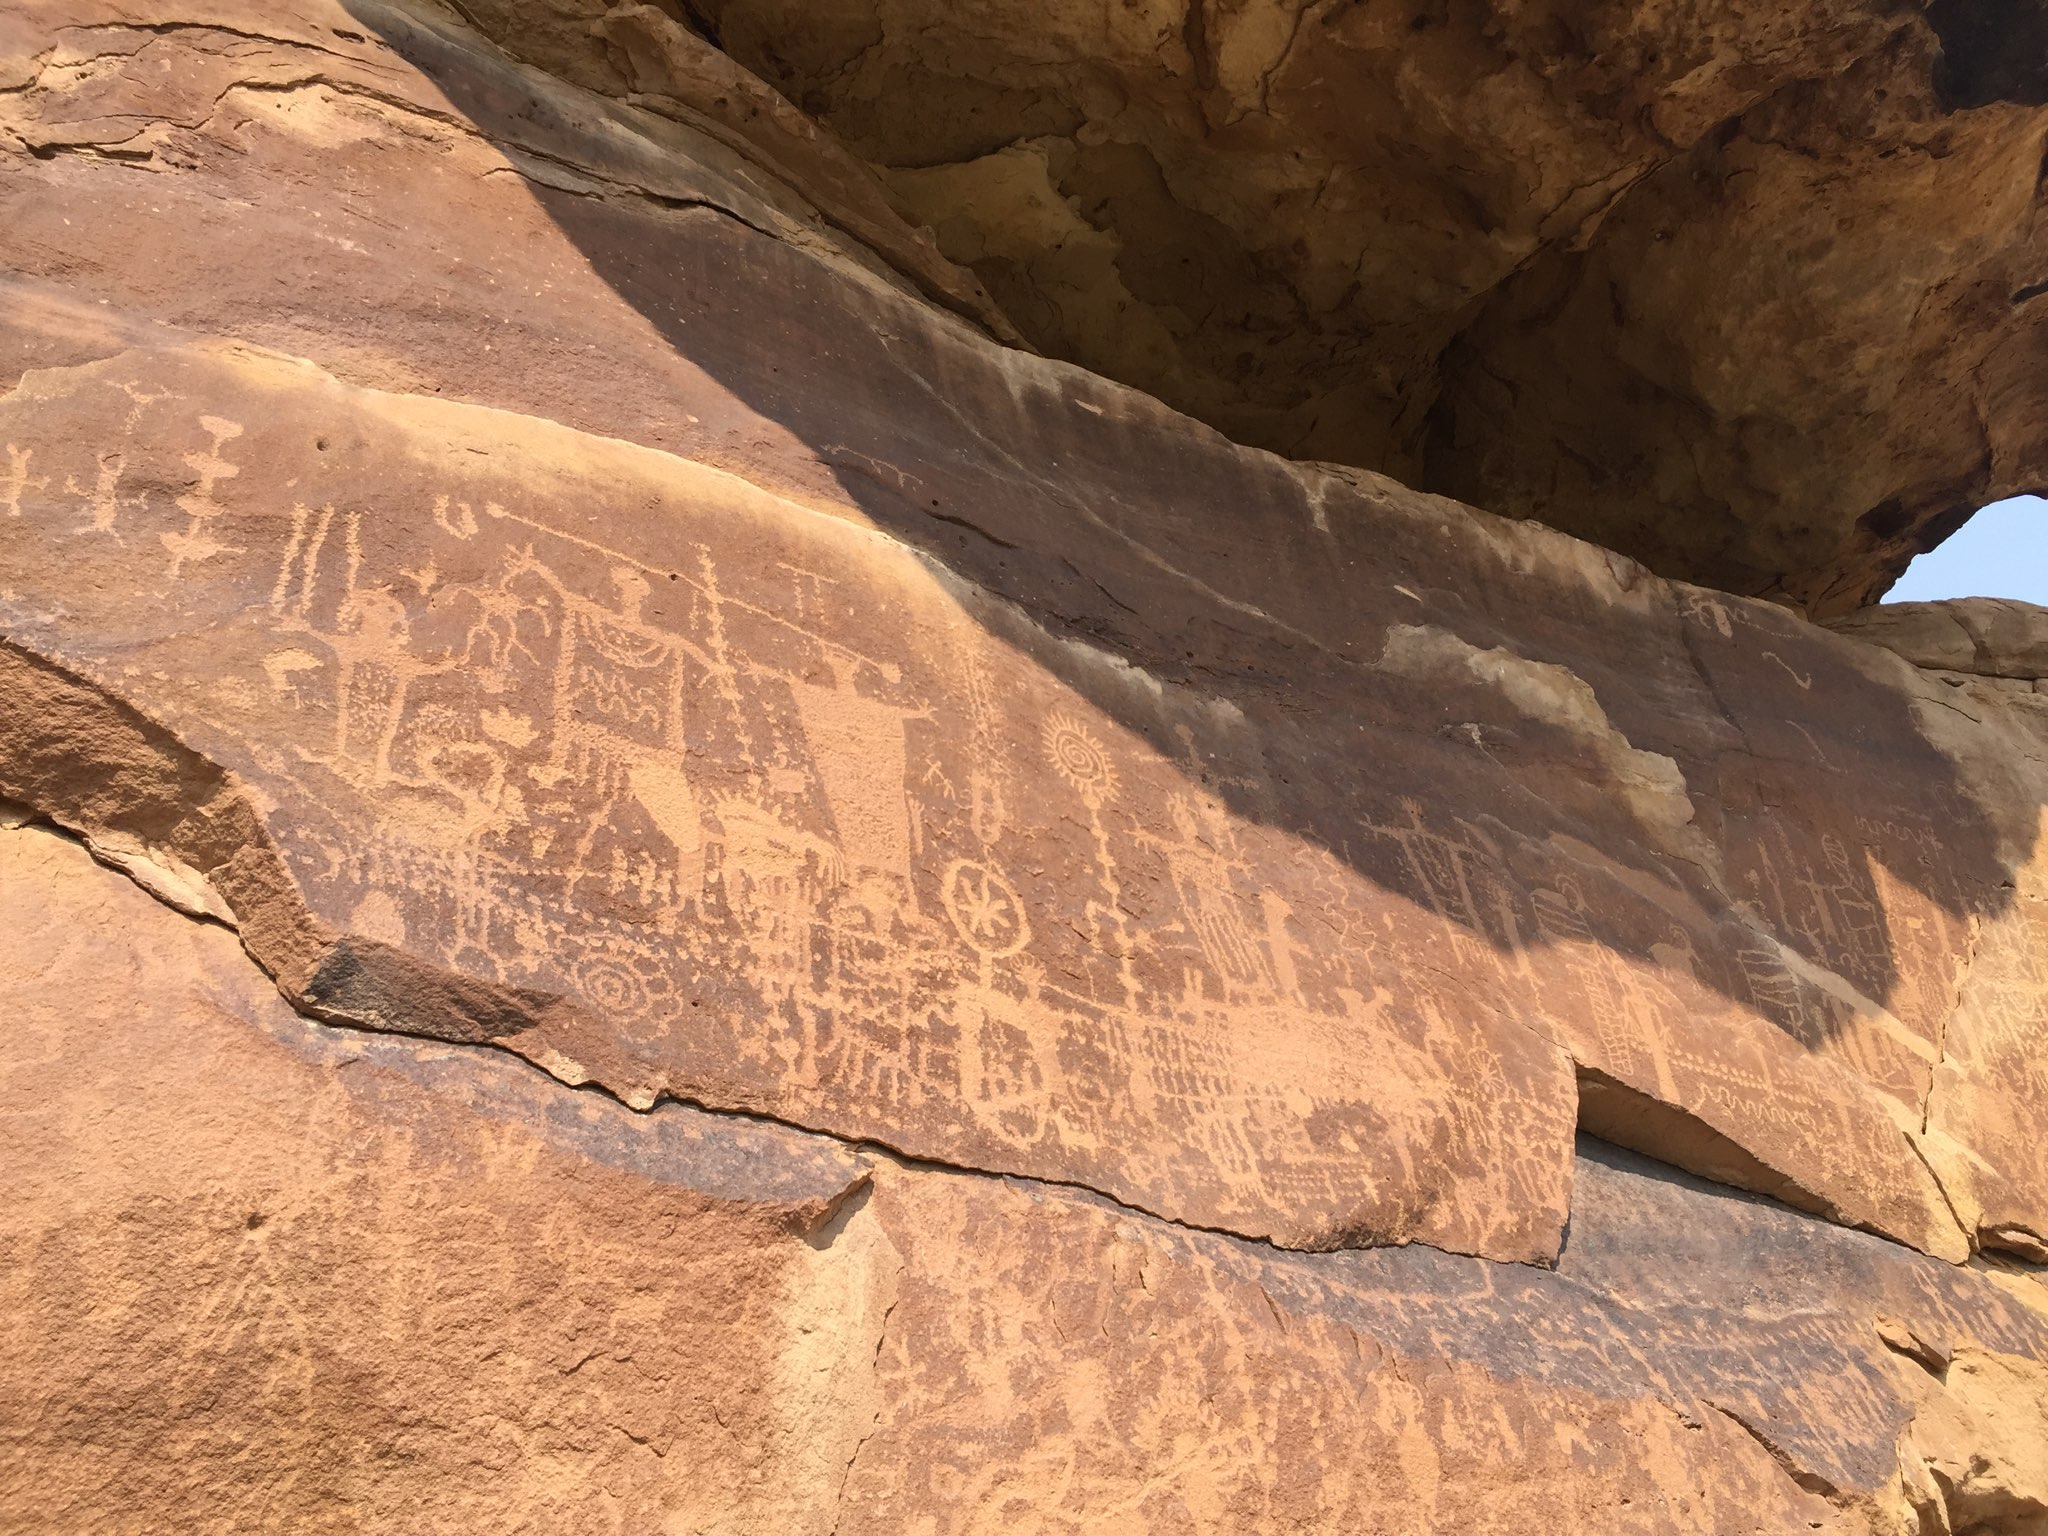 A petroglyph panel in the canyon. Photo by Ali Waller